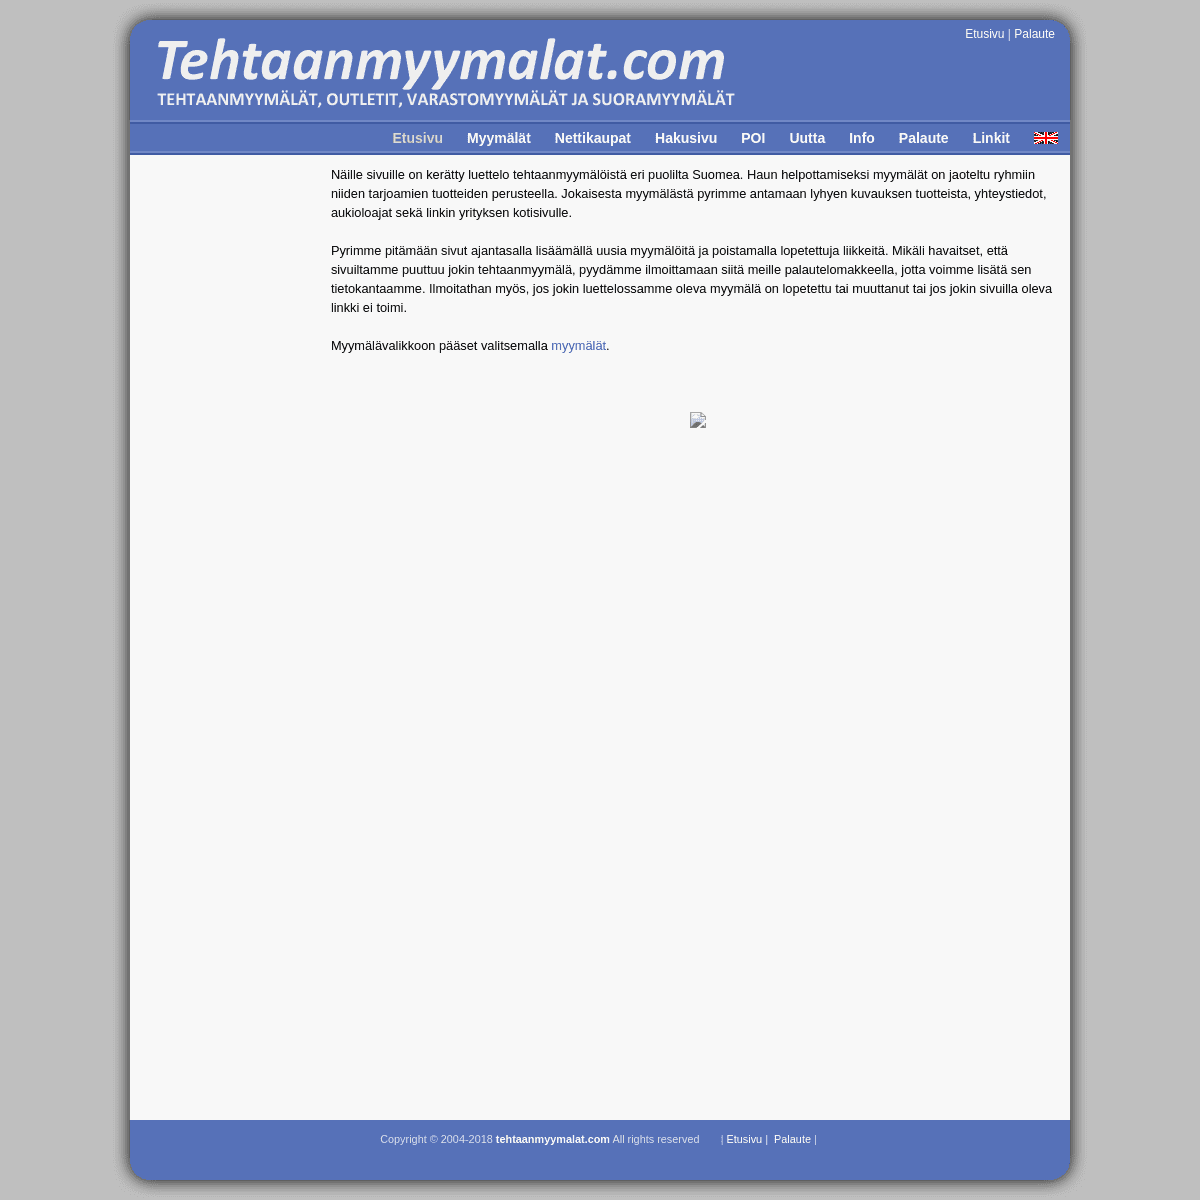 A complete backup of tehtaanmyymalat.com